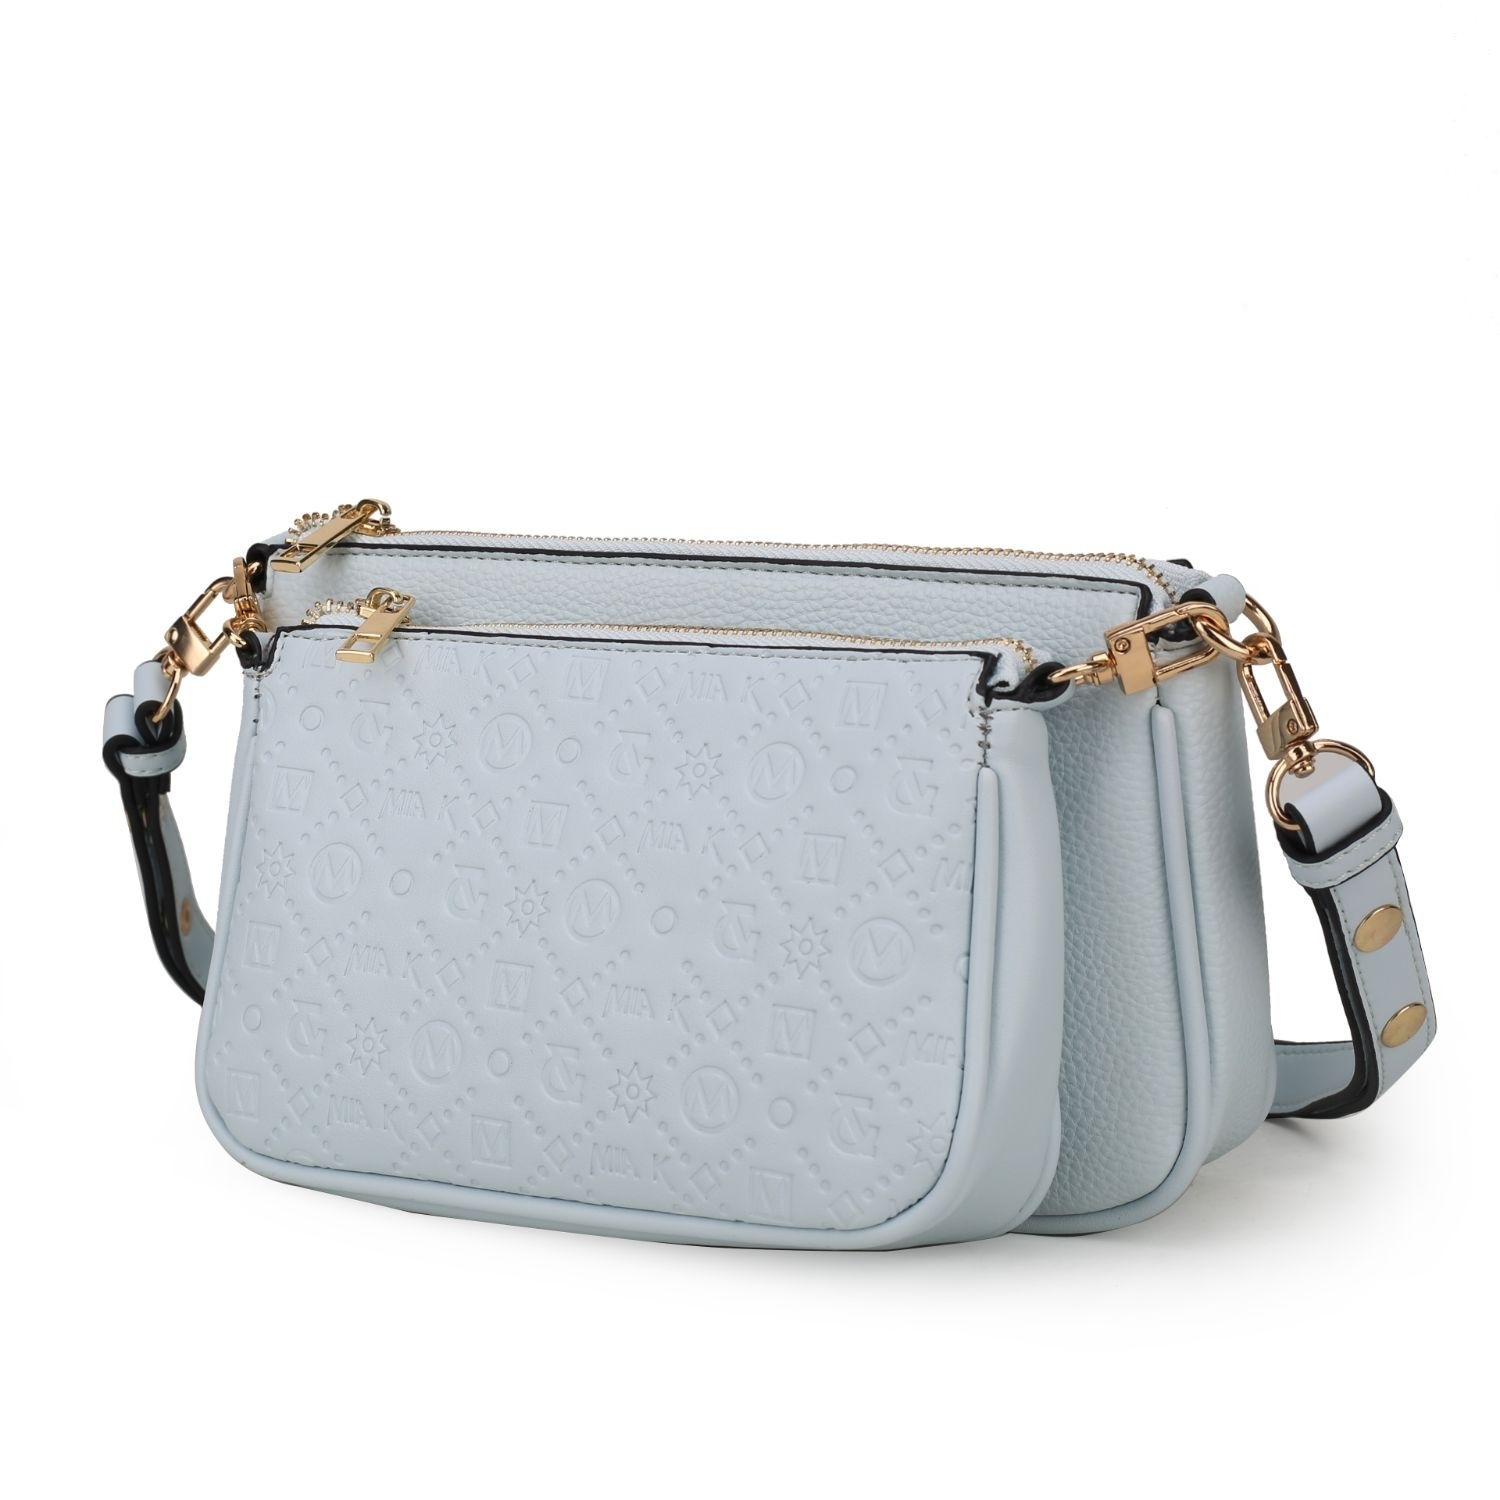 MKF Collection Dayla Vegan Leather Women's Shoulder Bag By Mia K -2 Pieces - Light Blue